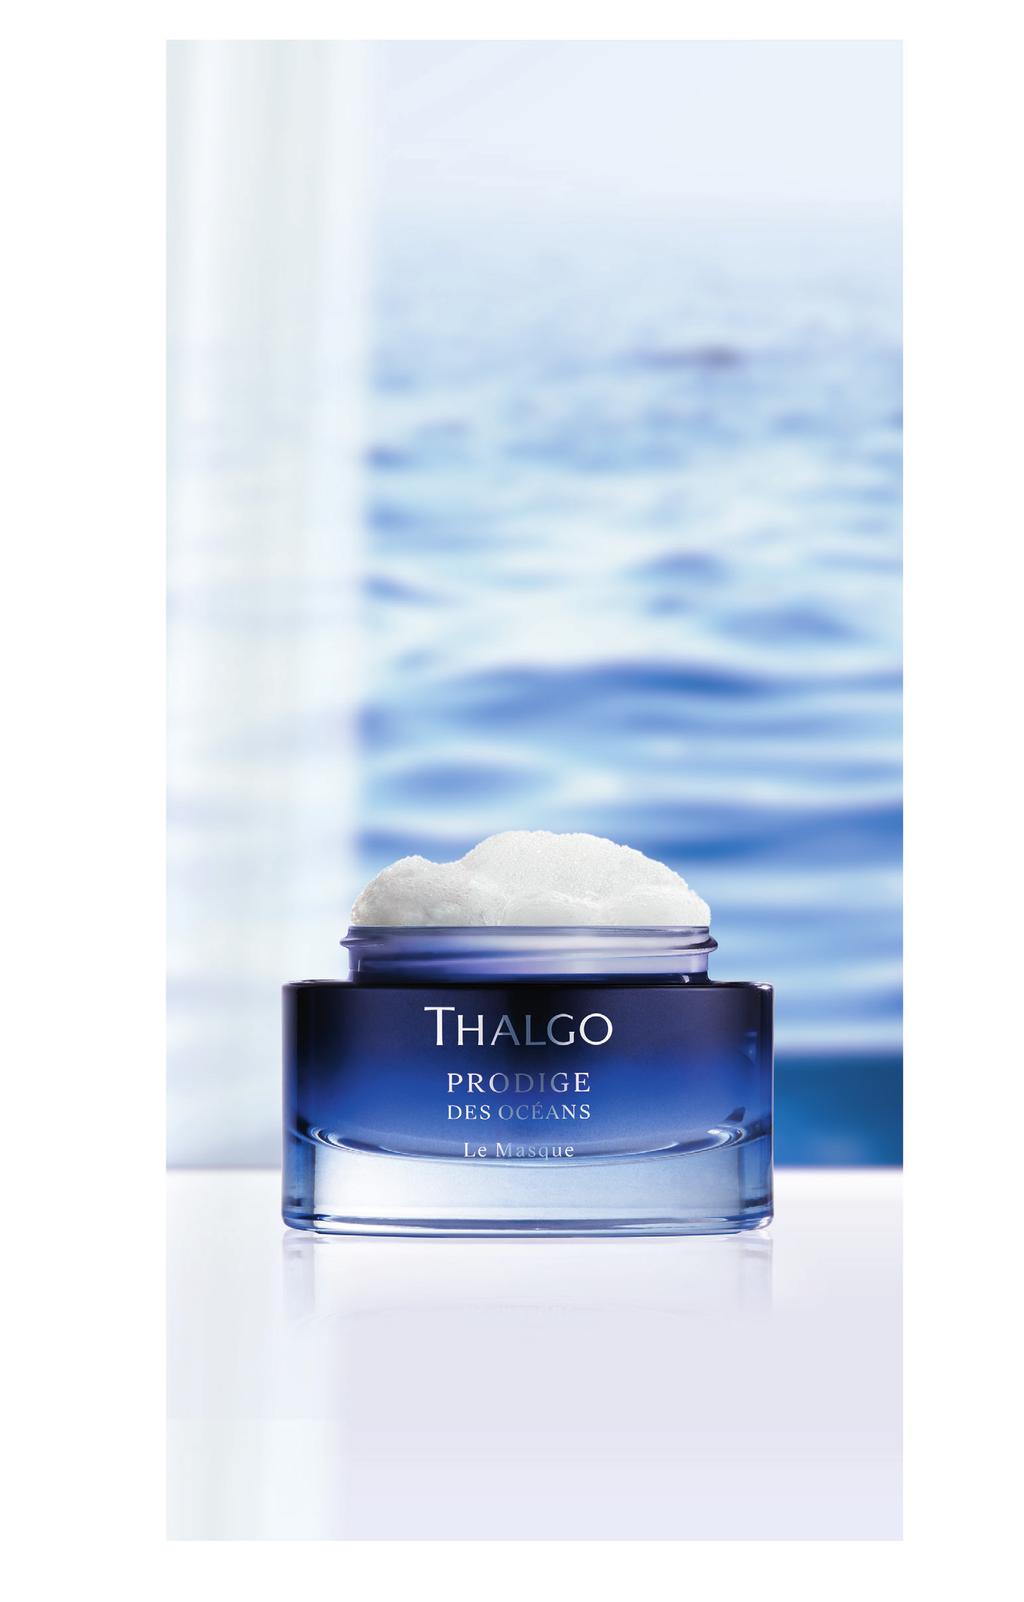 Mask PURE OXYGENATION - SMOOTHING, PLUMPING Smoothes wrinkles, improves the clarity of the complexion and leaves skin intensely smoothed in just 5 minutes Powerful active concentration: Intelligence